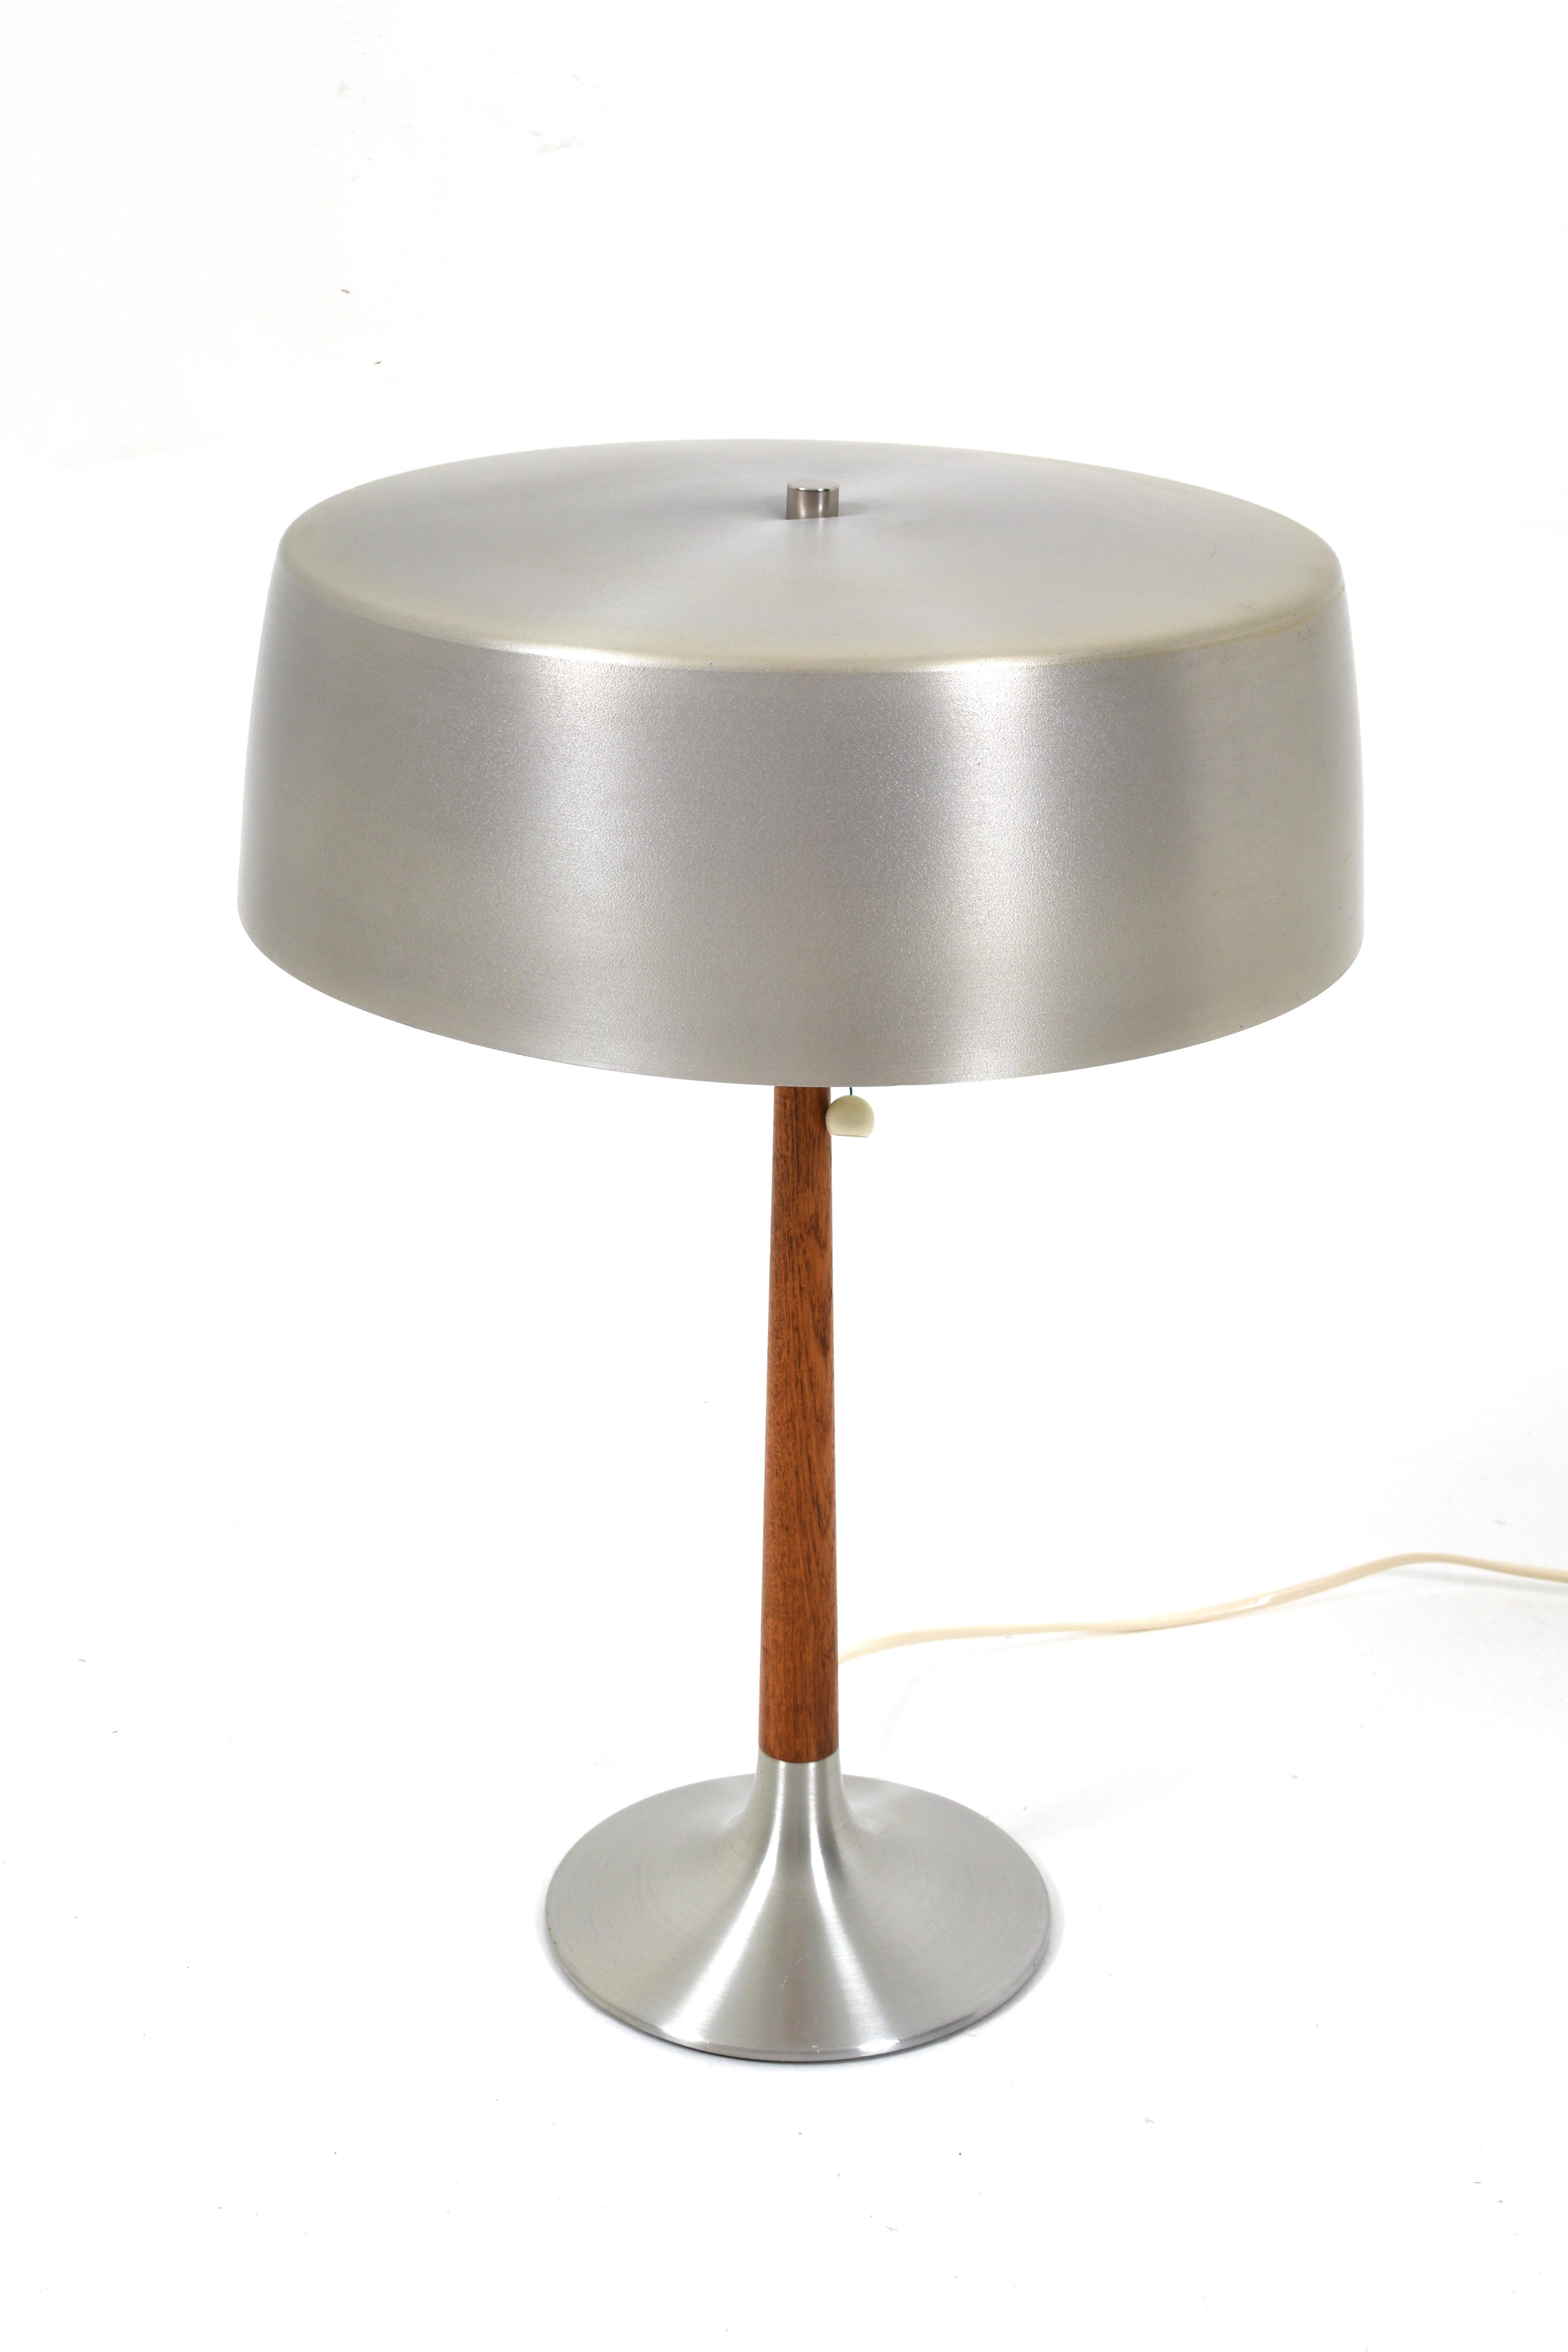 Swedish Scandinavian Mid Century Table Lamp by Svend Aage Holm Sørensen for ASEA For Sale